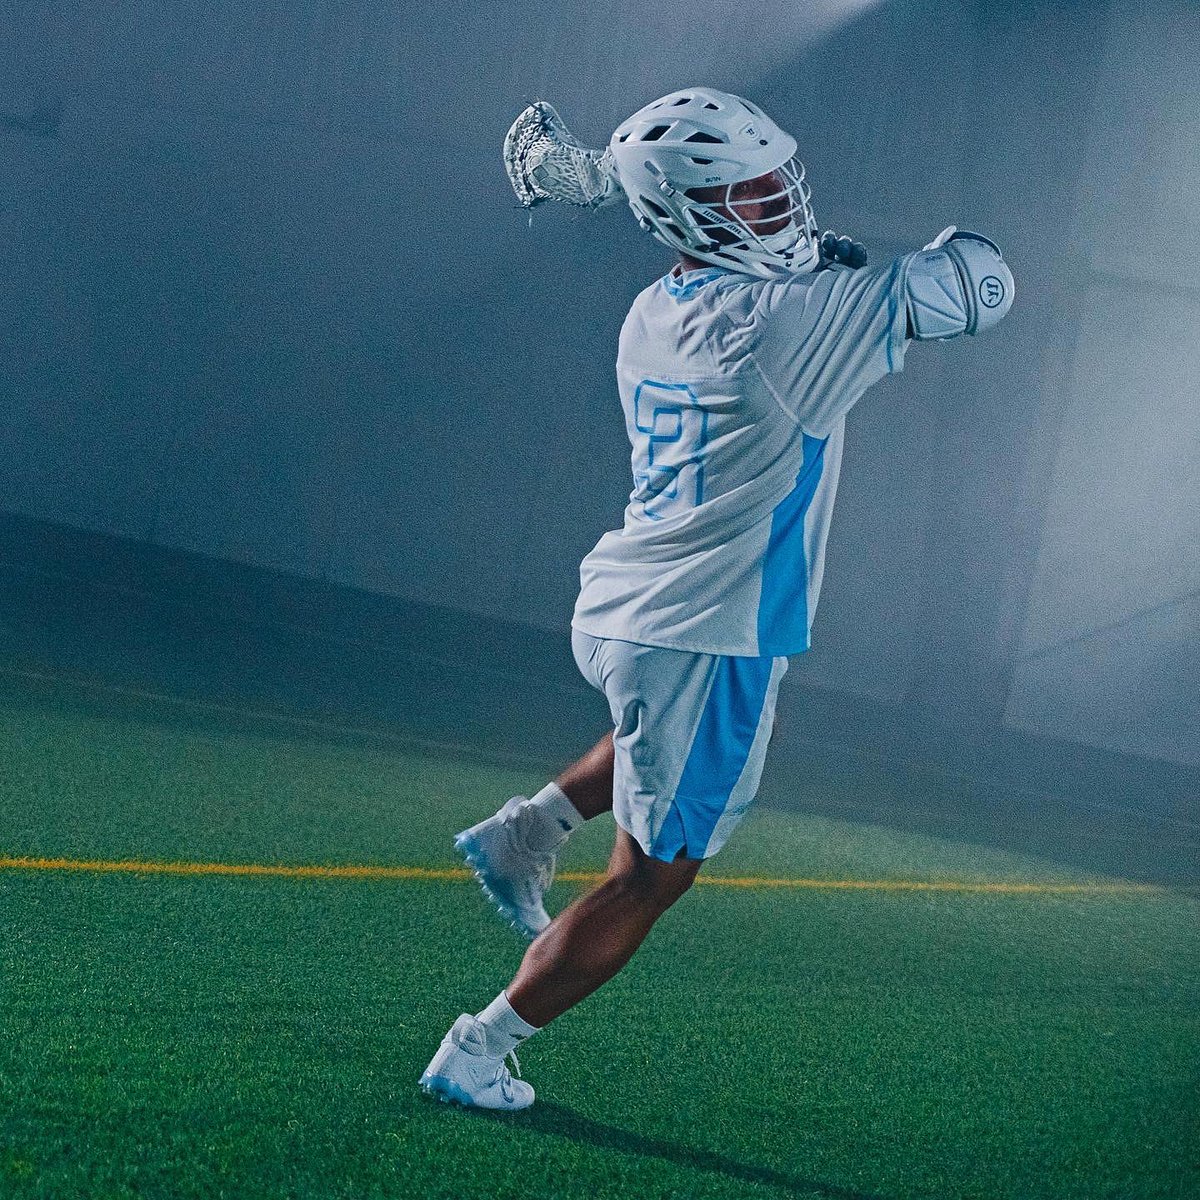 First look at our pros in the new Freeze V4’s 🥶❄️ @NewBalanceLax